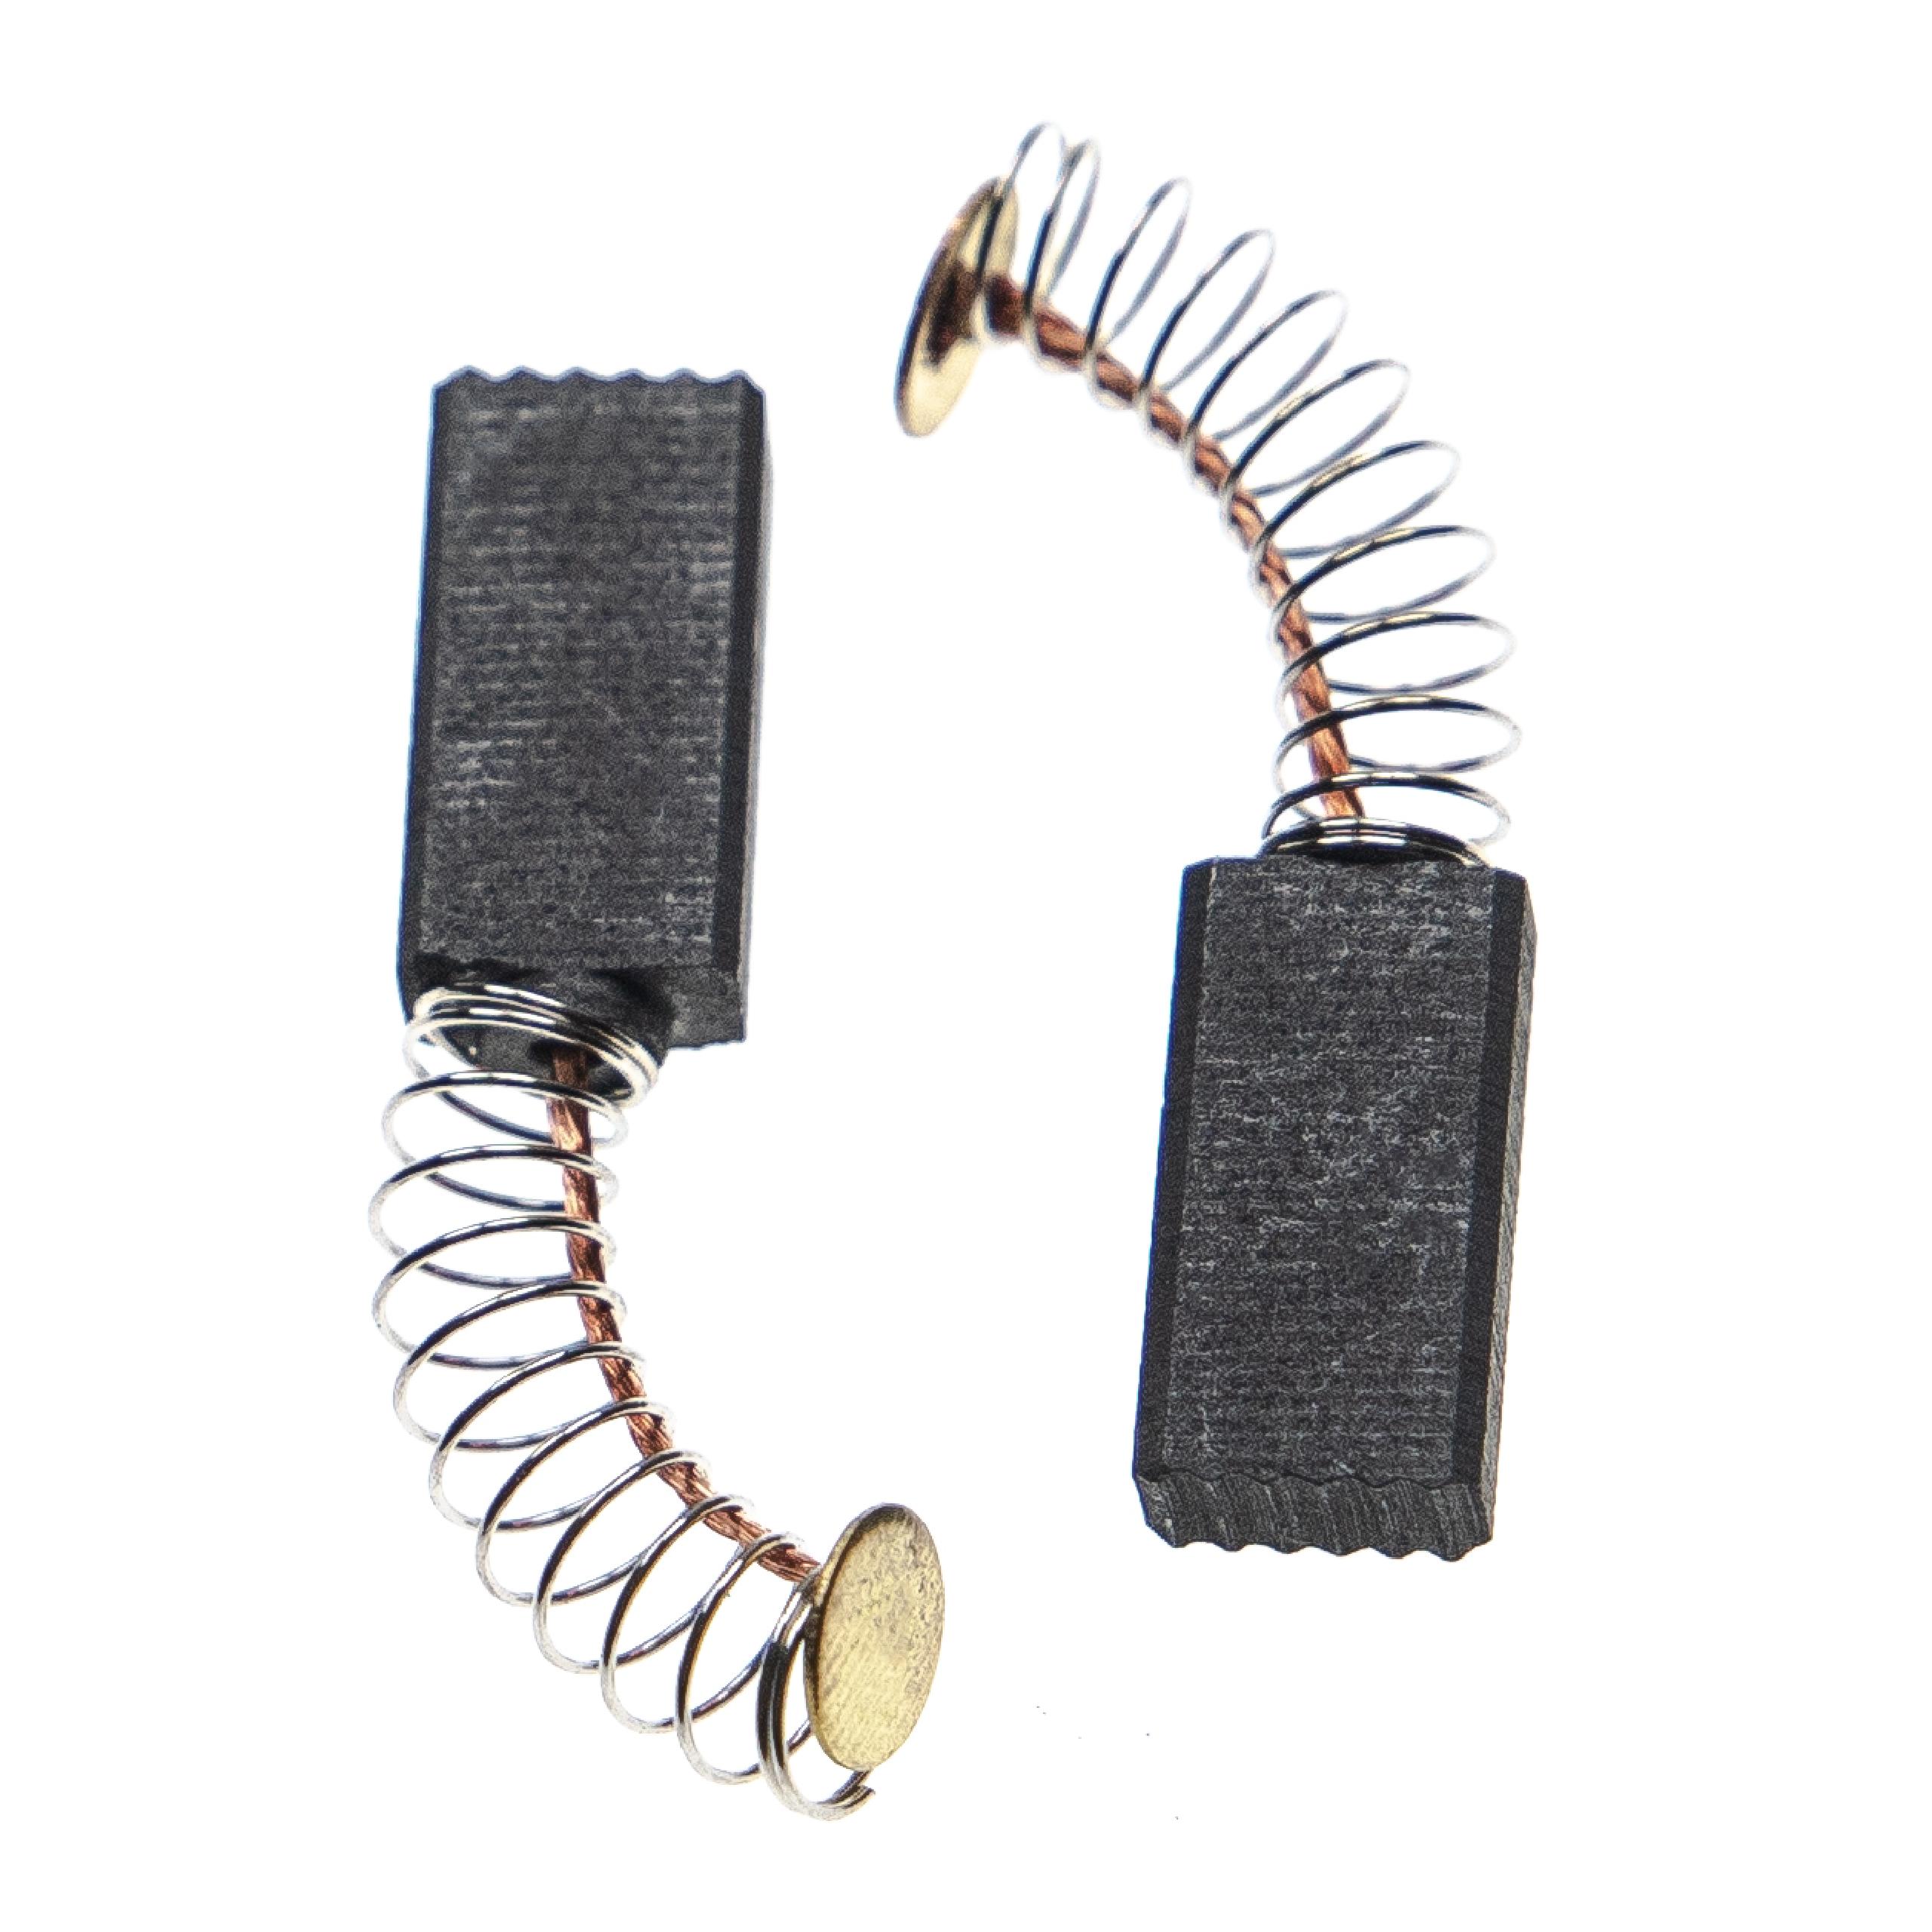 2x Carbon Brush as Replacement for Bosch 1617014114 Electric Power Tools + Spring, 16 x 8 x 5mm